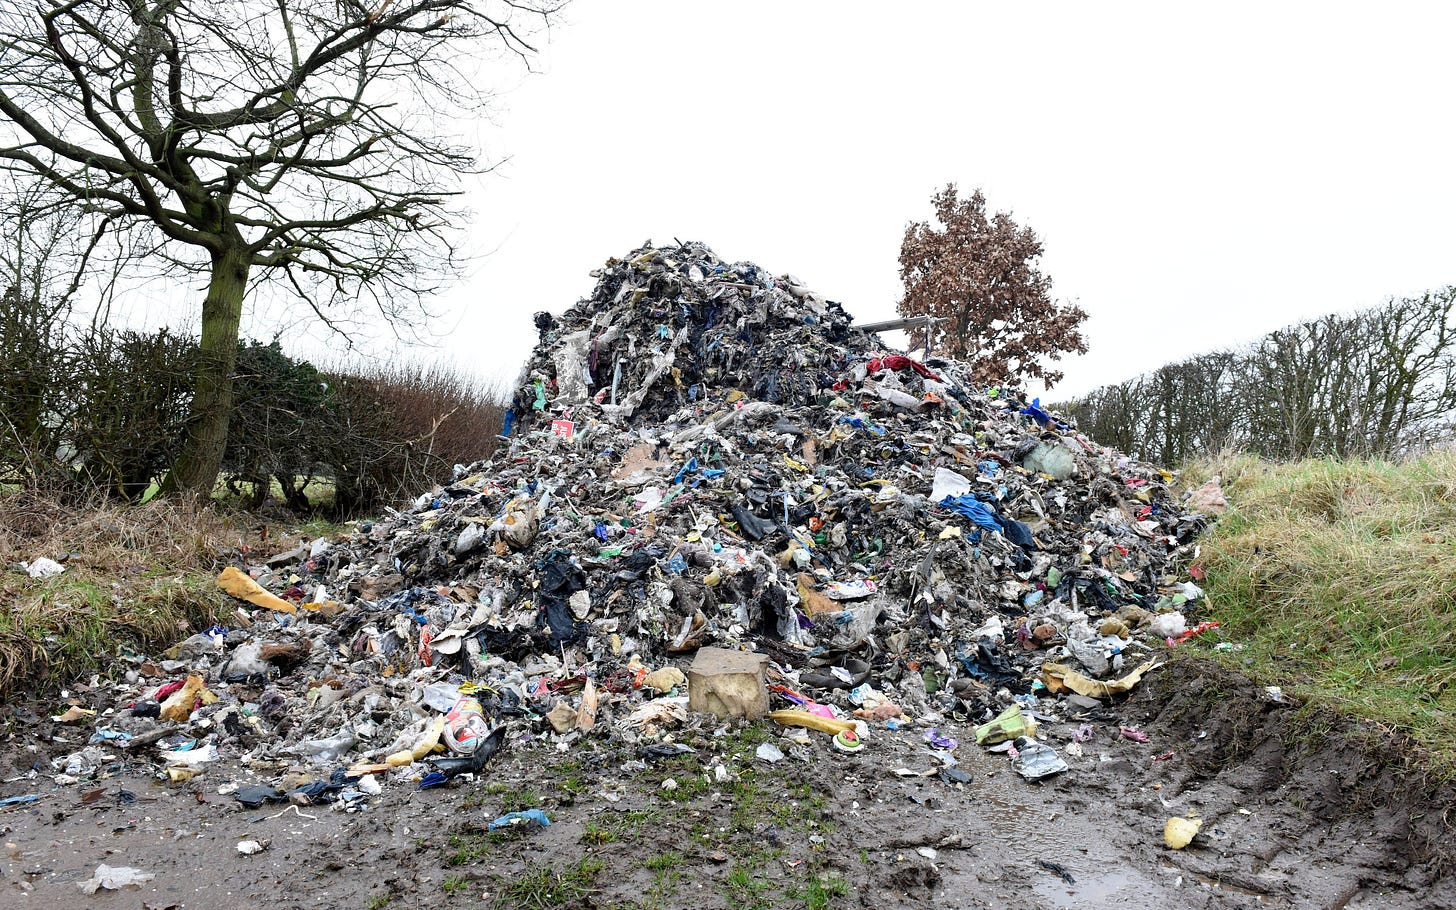 Is this huge pile of rubbish the biggest load of fly-tipped garbage ever?